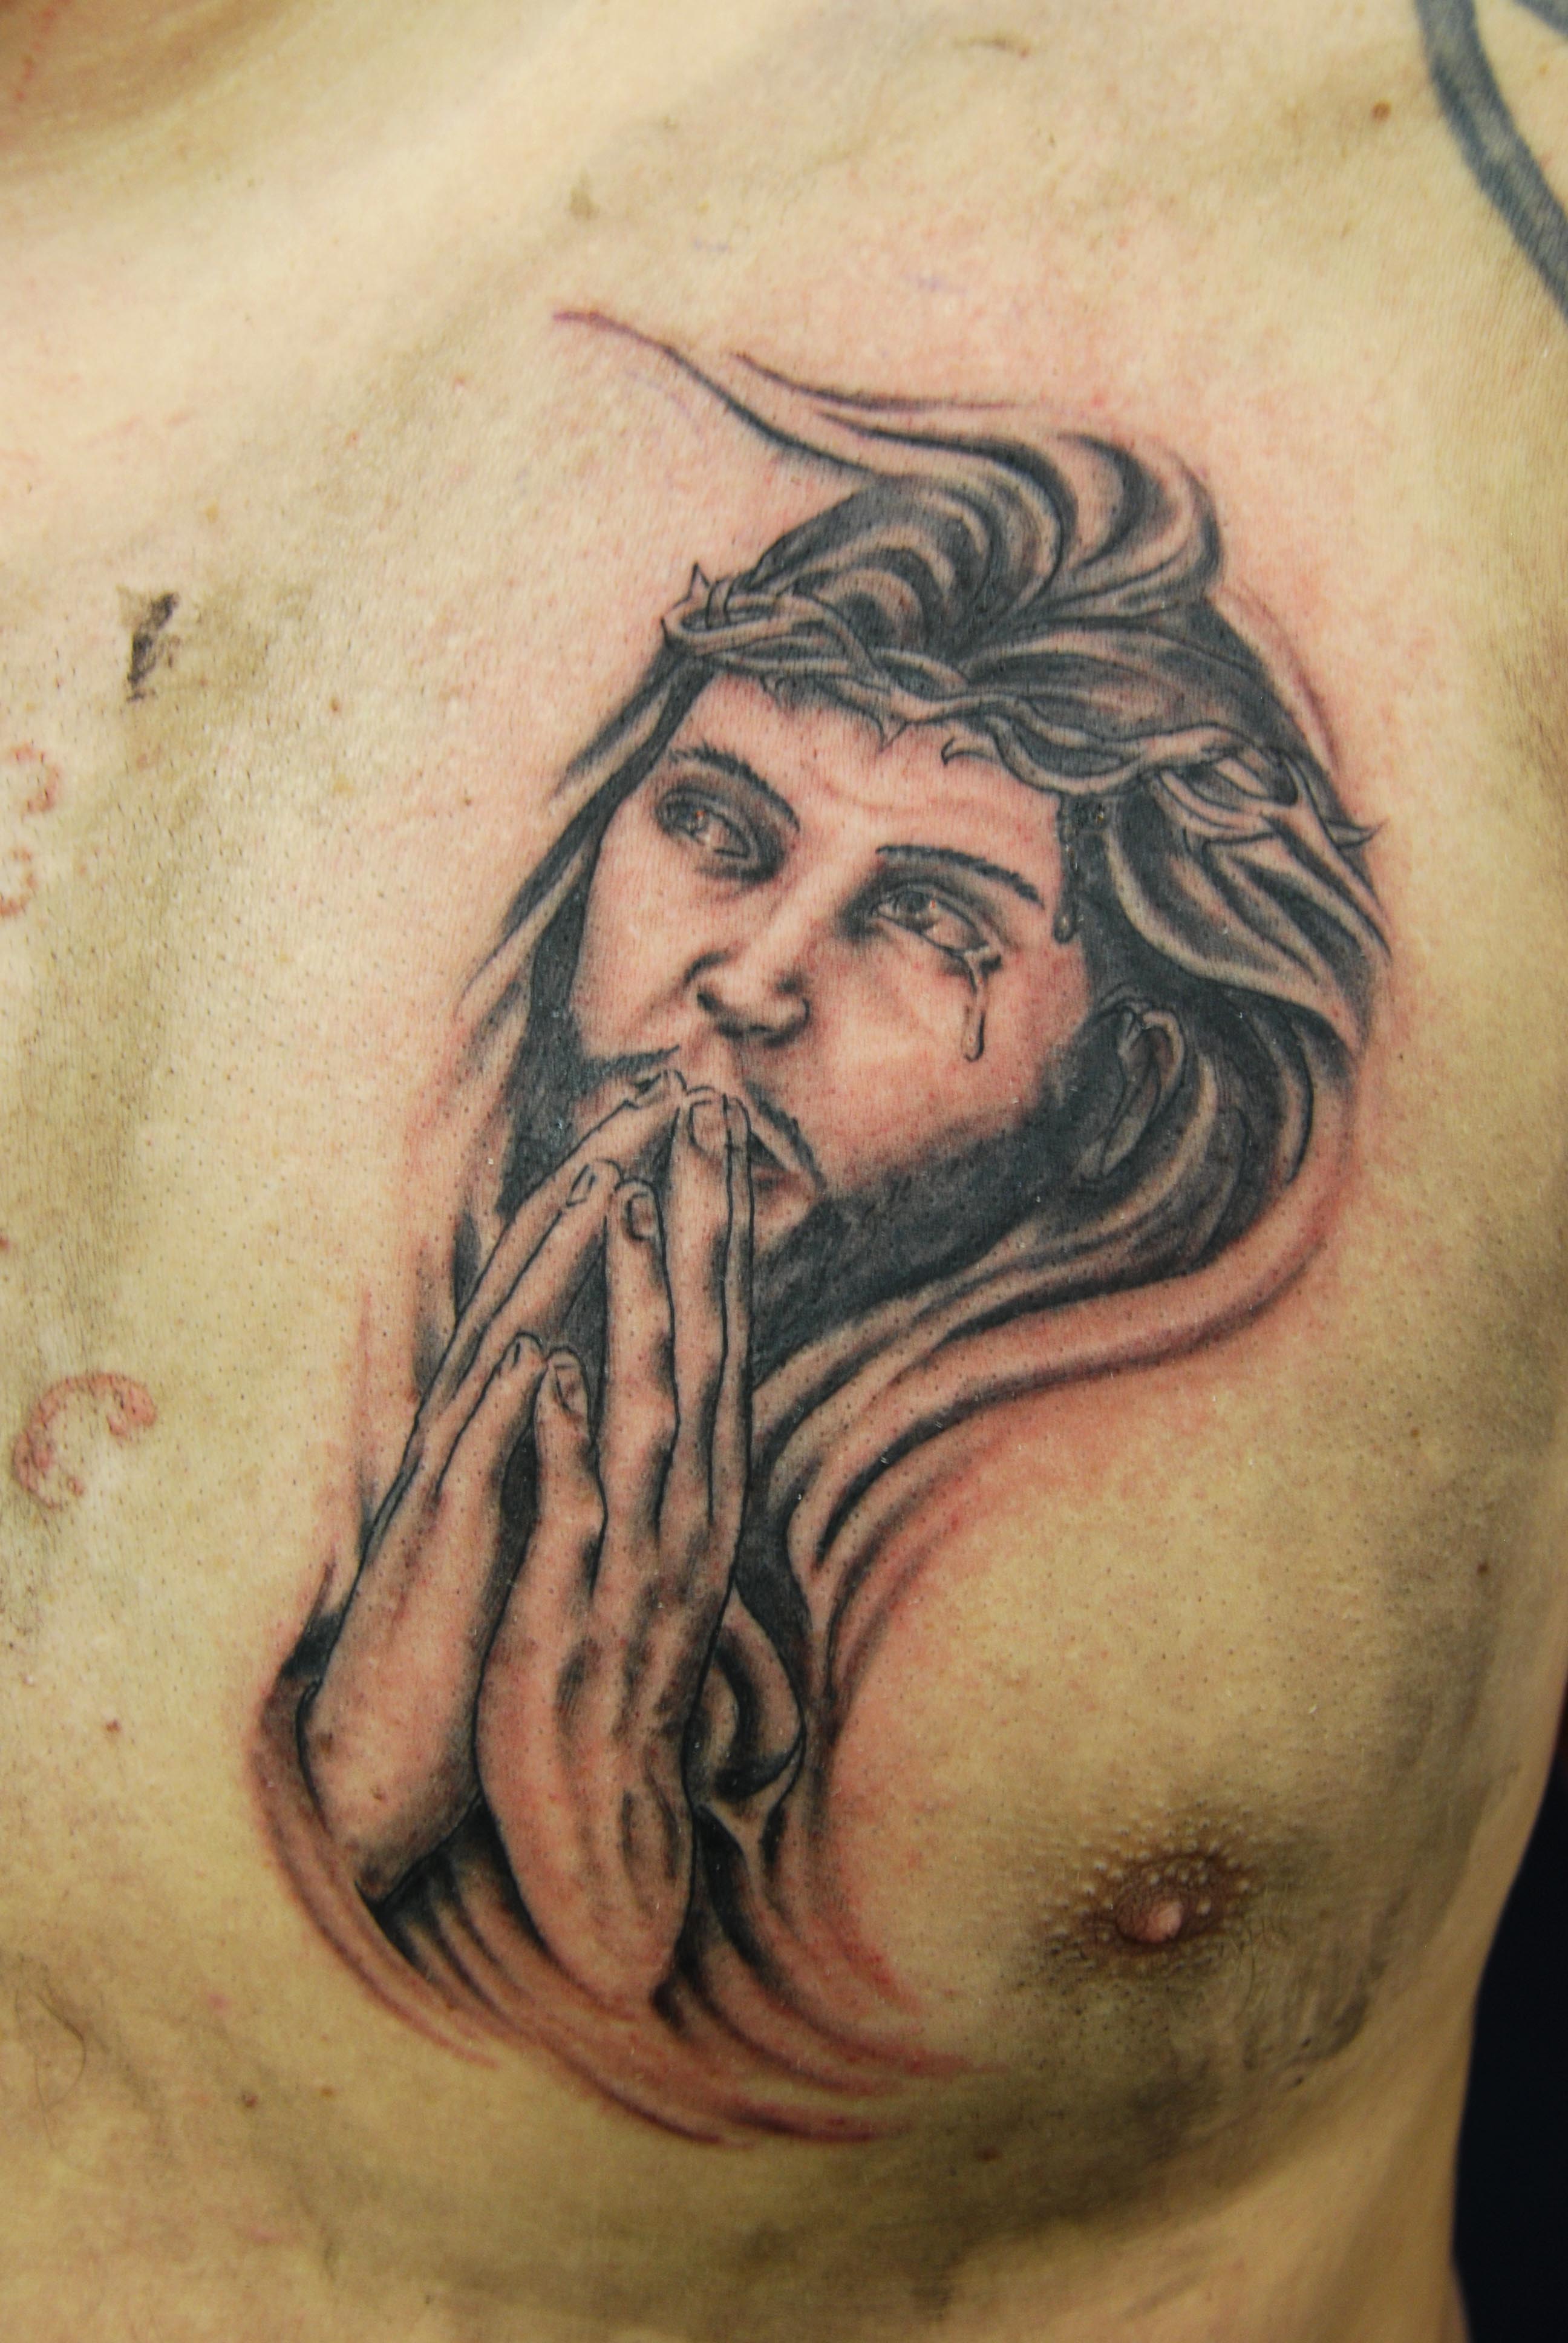 Religious Tattoos Designs, Ideas and Meaning | Tattoos For You